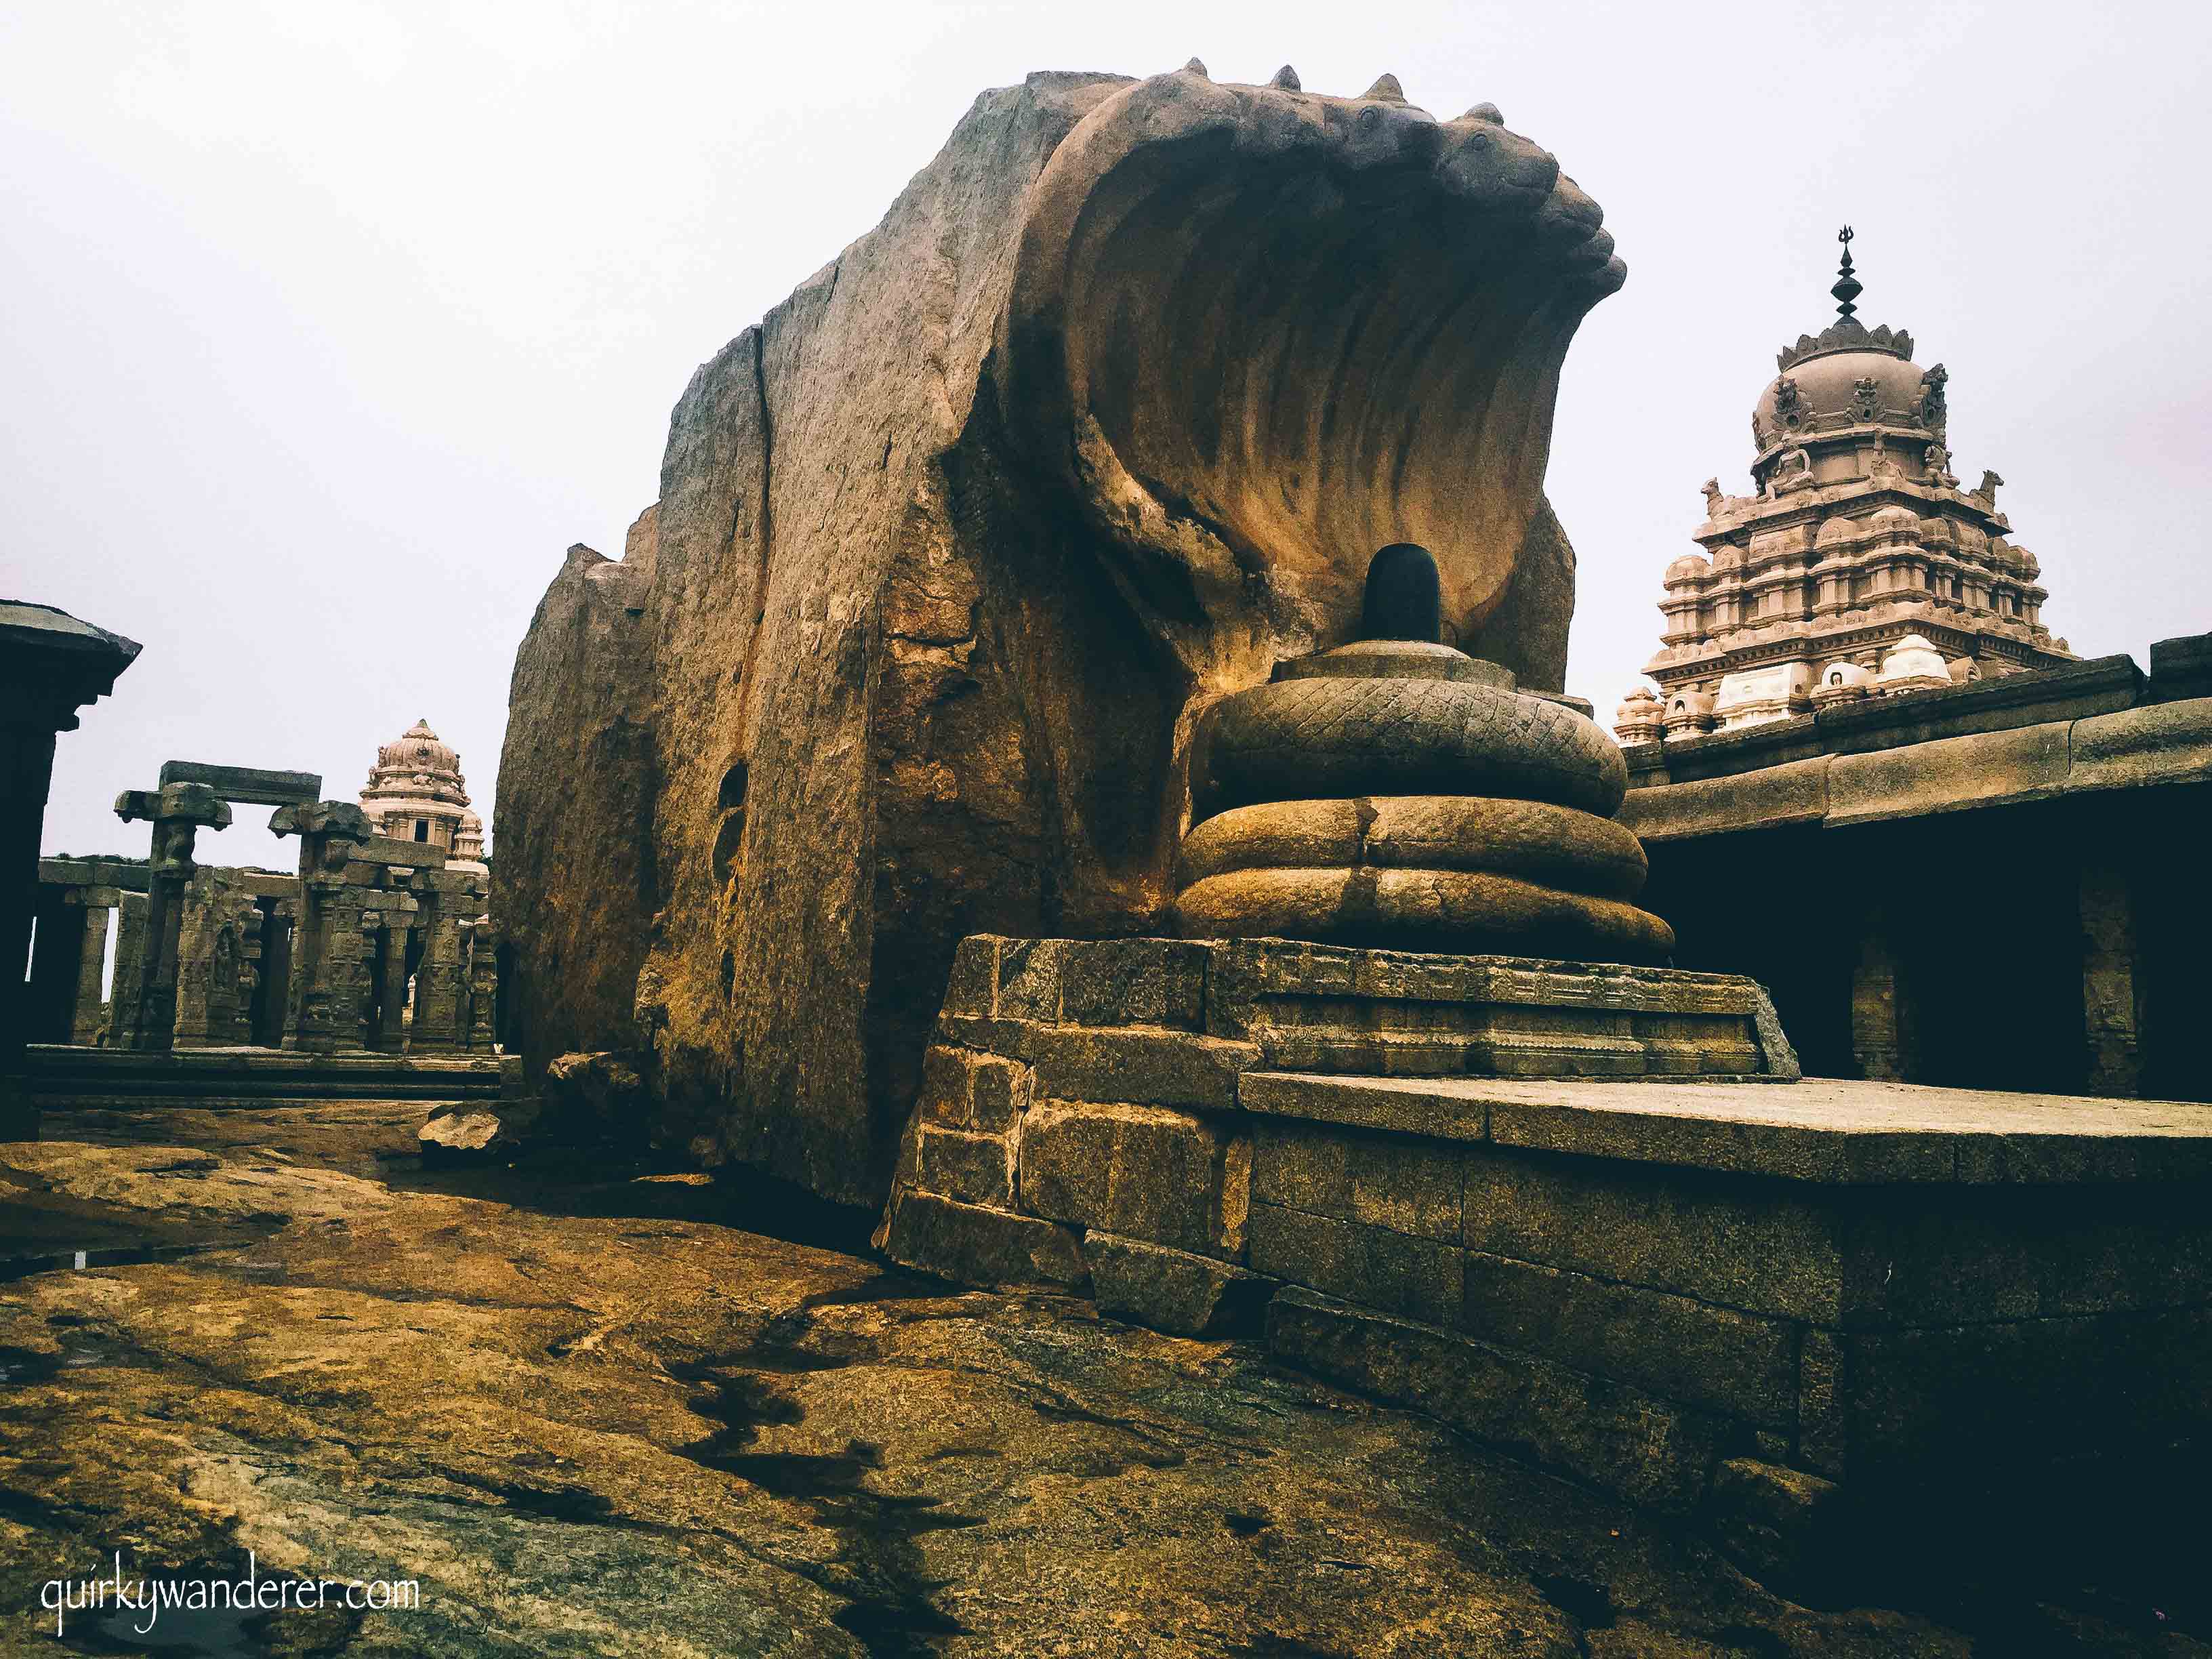 Lepakshi is a small town in Andhra Pradesh and makes for an ideal getaway from Bangalore. It is known for the famous Veerbhadra temple whose 16th century stone architecture is worth a mention.